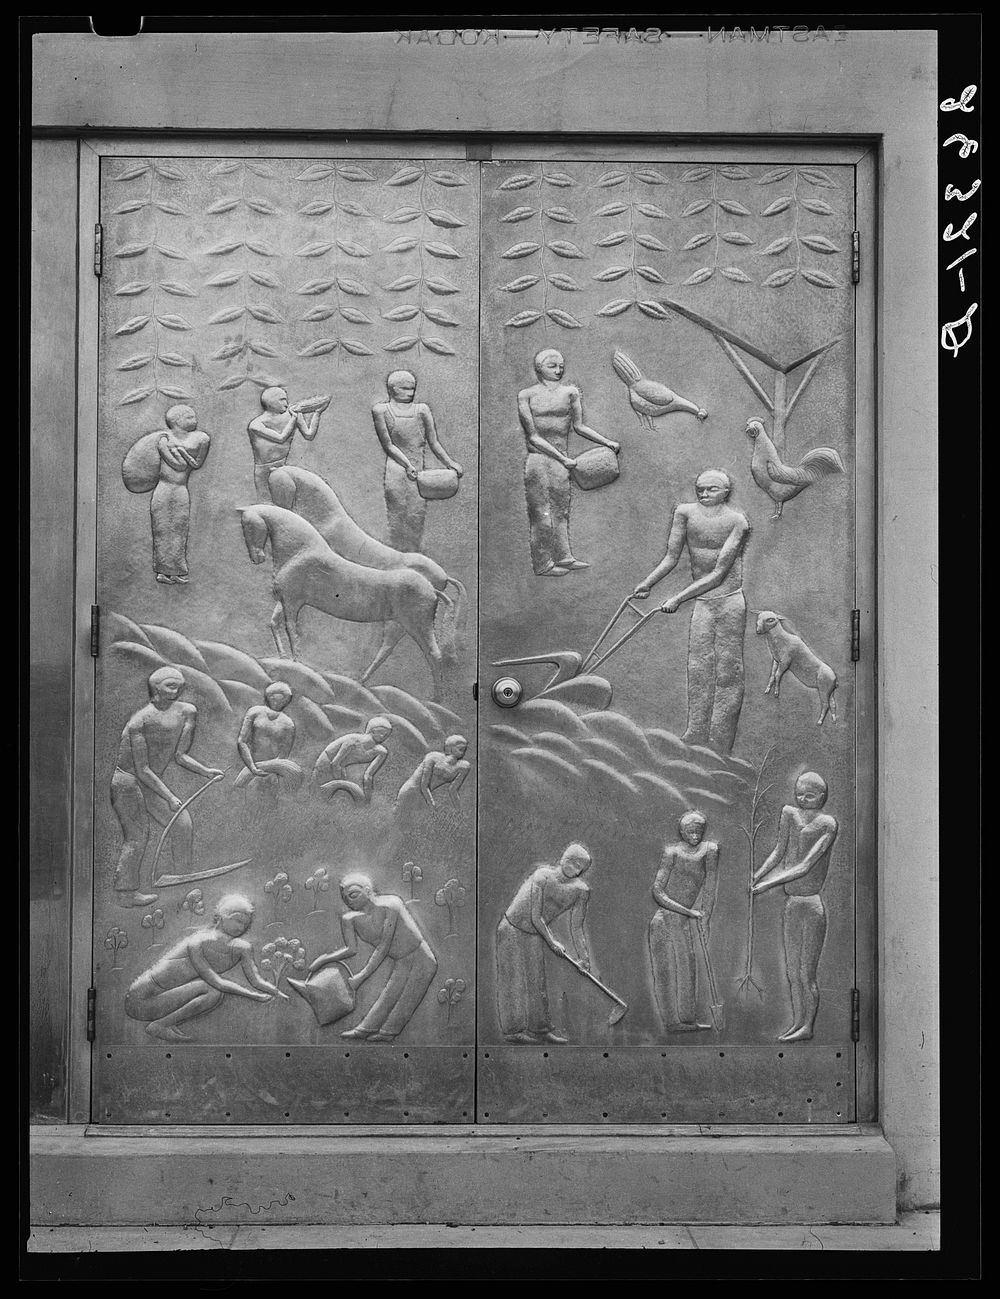 Doors at the Hightstown community building, New Jersey. Sourced from the Library of Congress.